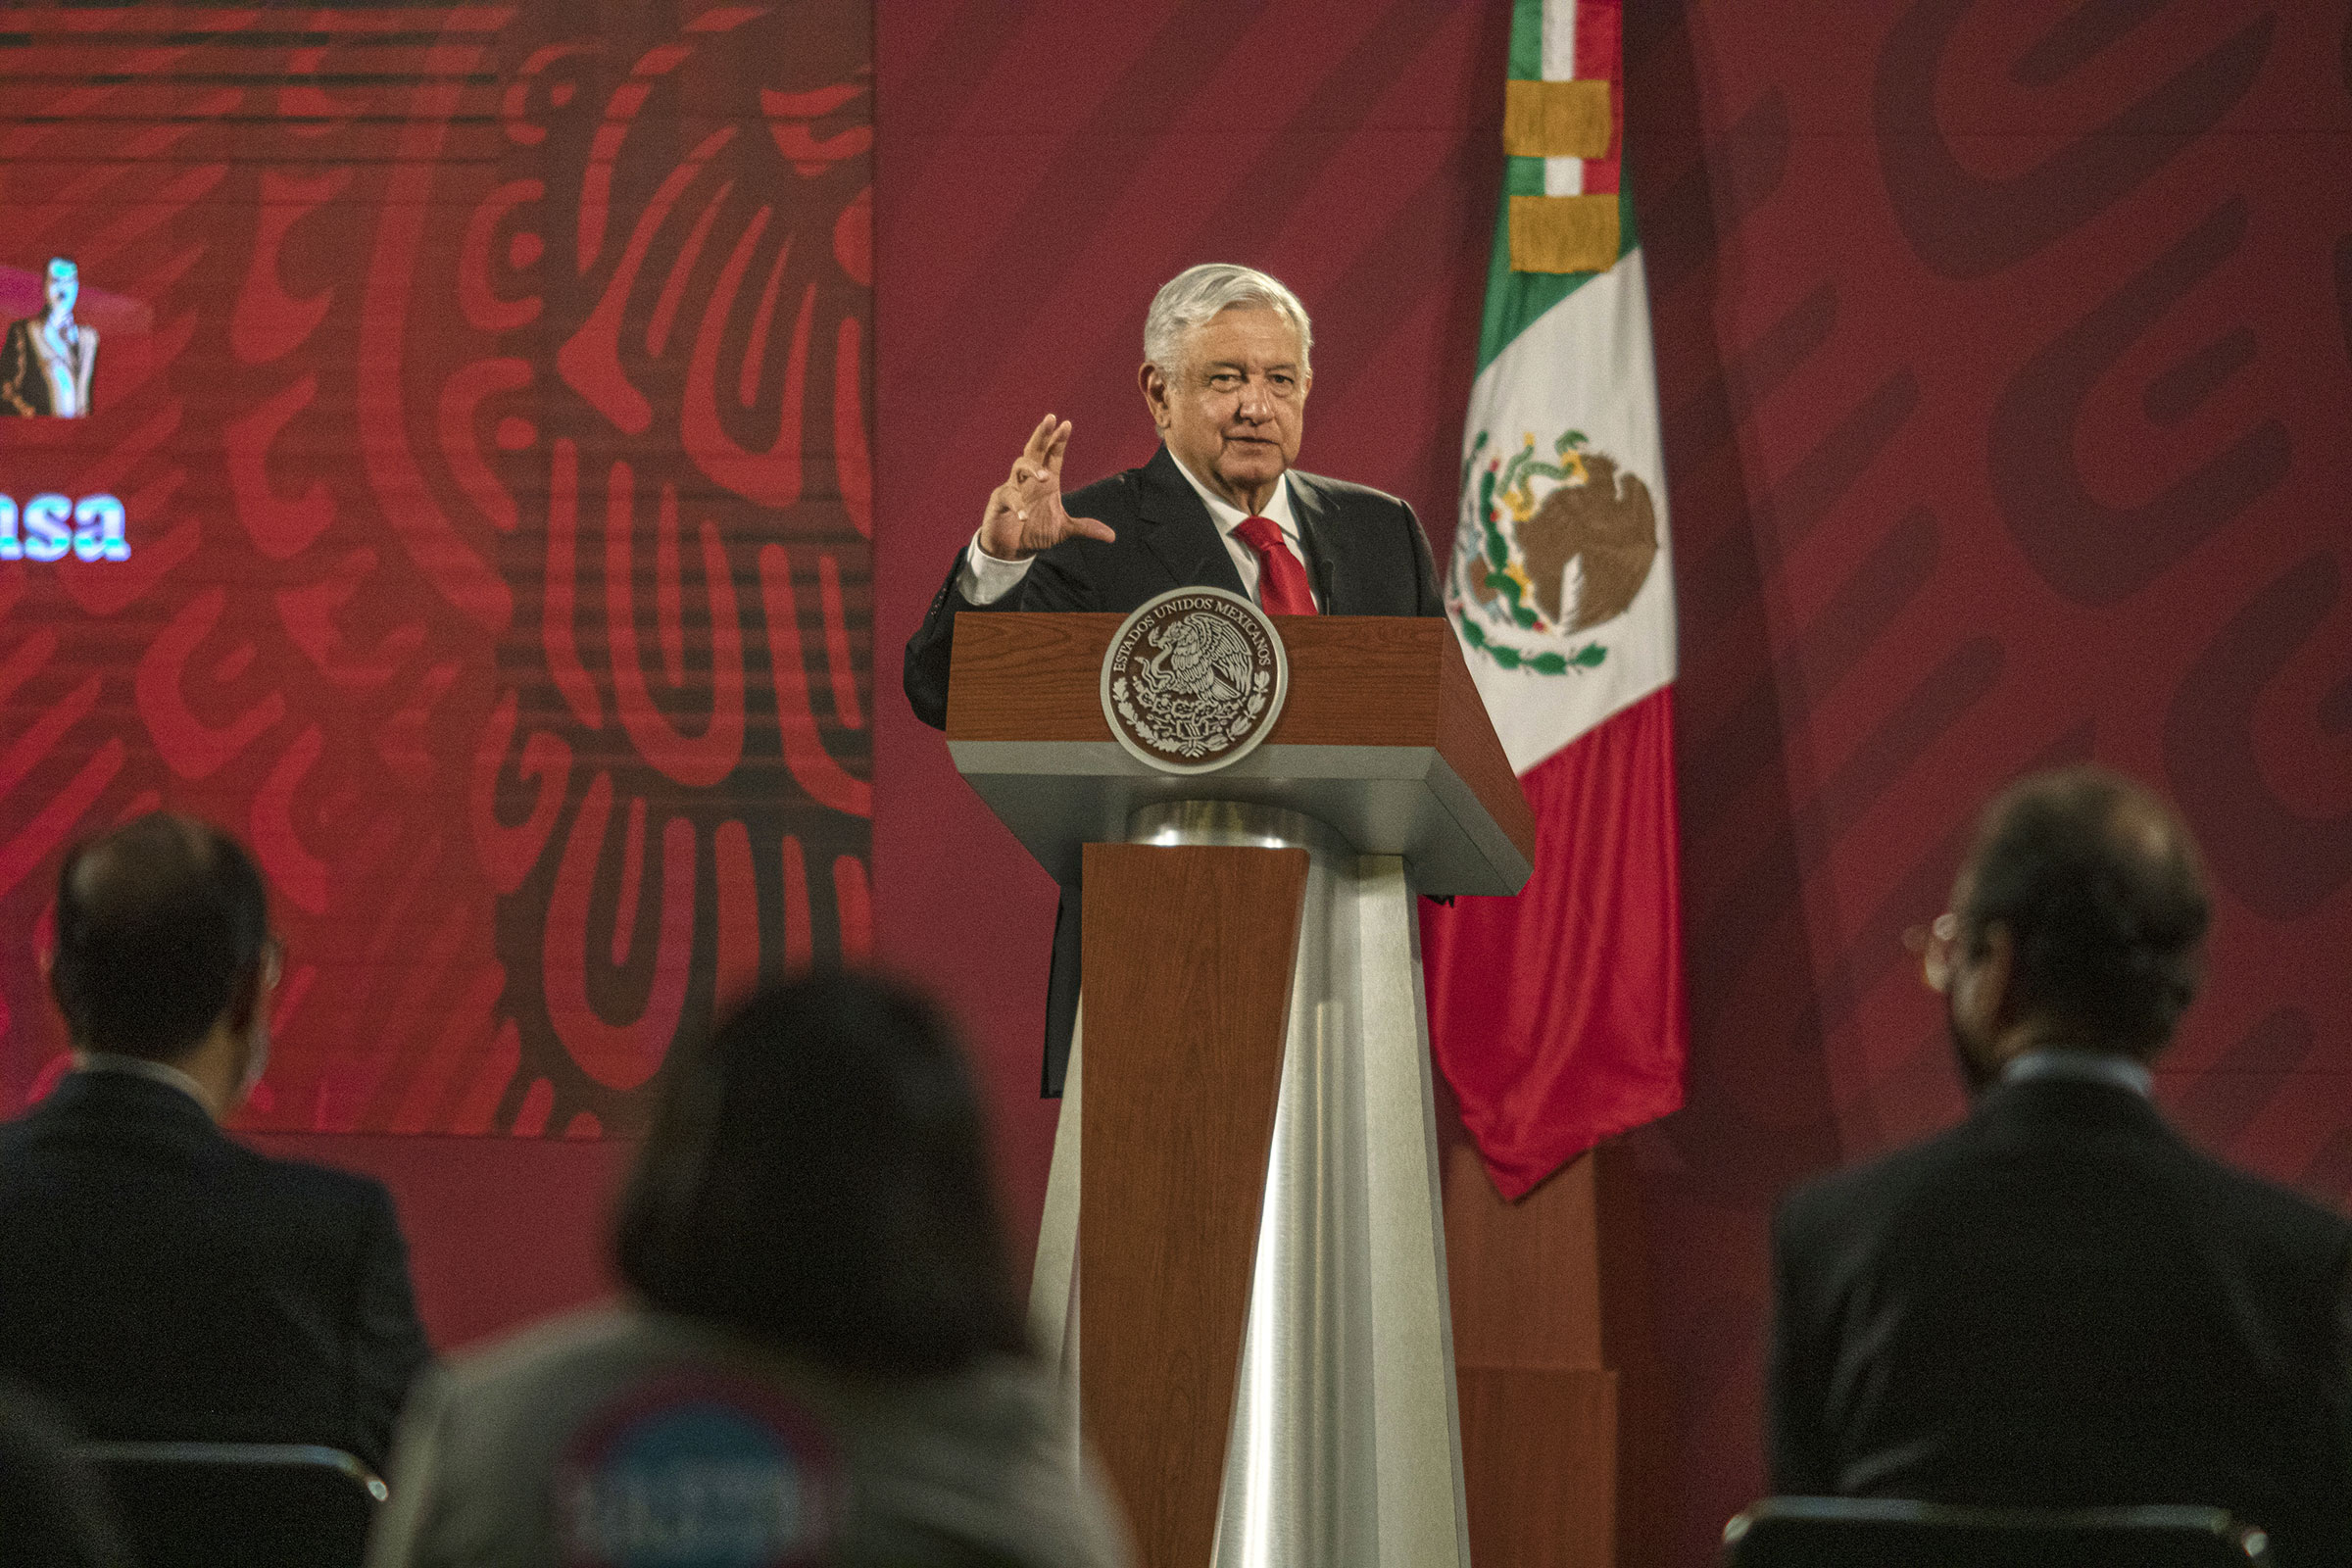 Andres Manuel Lopez Obrador, Mexico's president, speaks during a news conference at the National Palace in Mexico City, on July 22, 2020. (Alejandro Cegarra—Bloomberg/Getty Images)